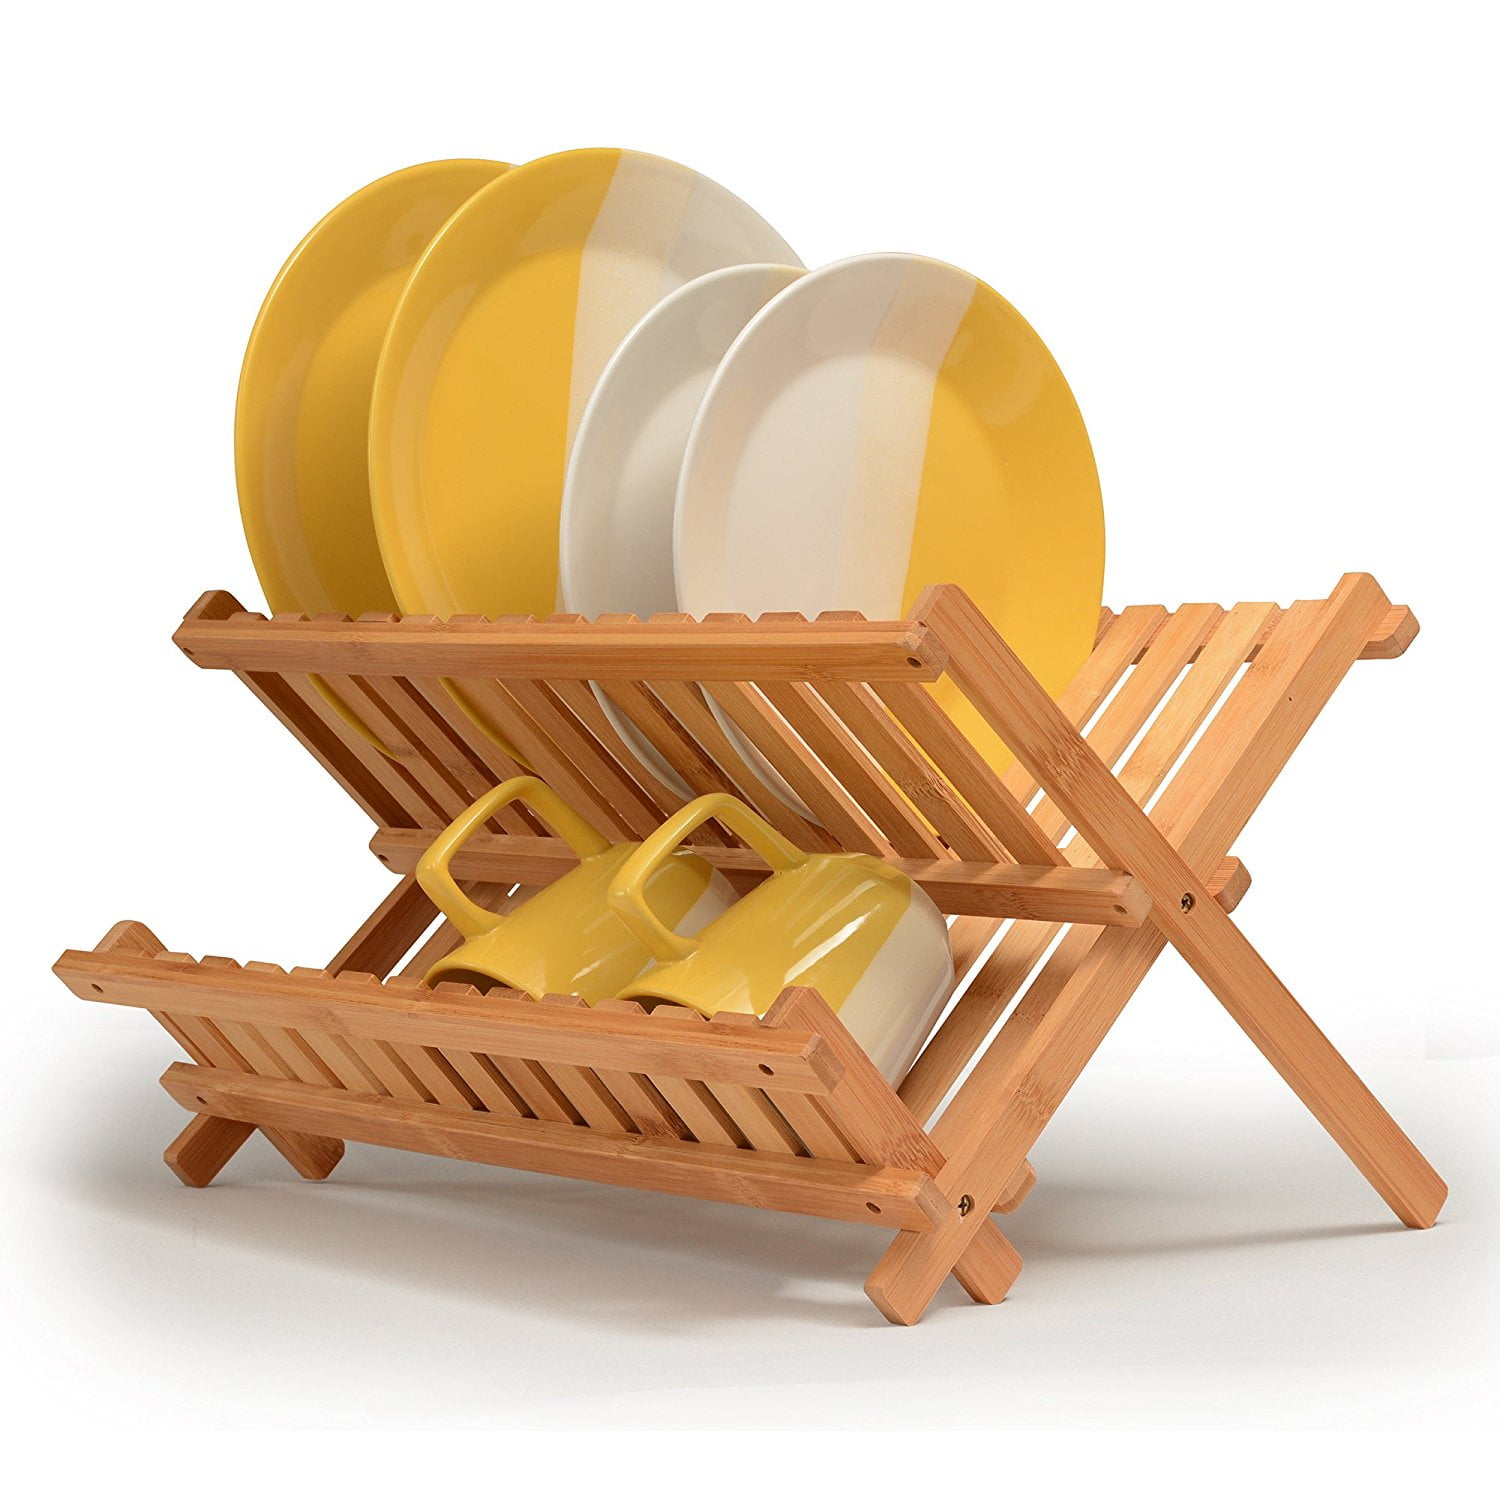 Worthyeah Bamboo Dish Drying Rack, 2 Tier Collapsible Dish Rack with  Utensil Holder, Wooden Dish Drying Rack for Kitchen Counter, Large Folding  Drying